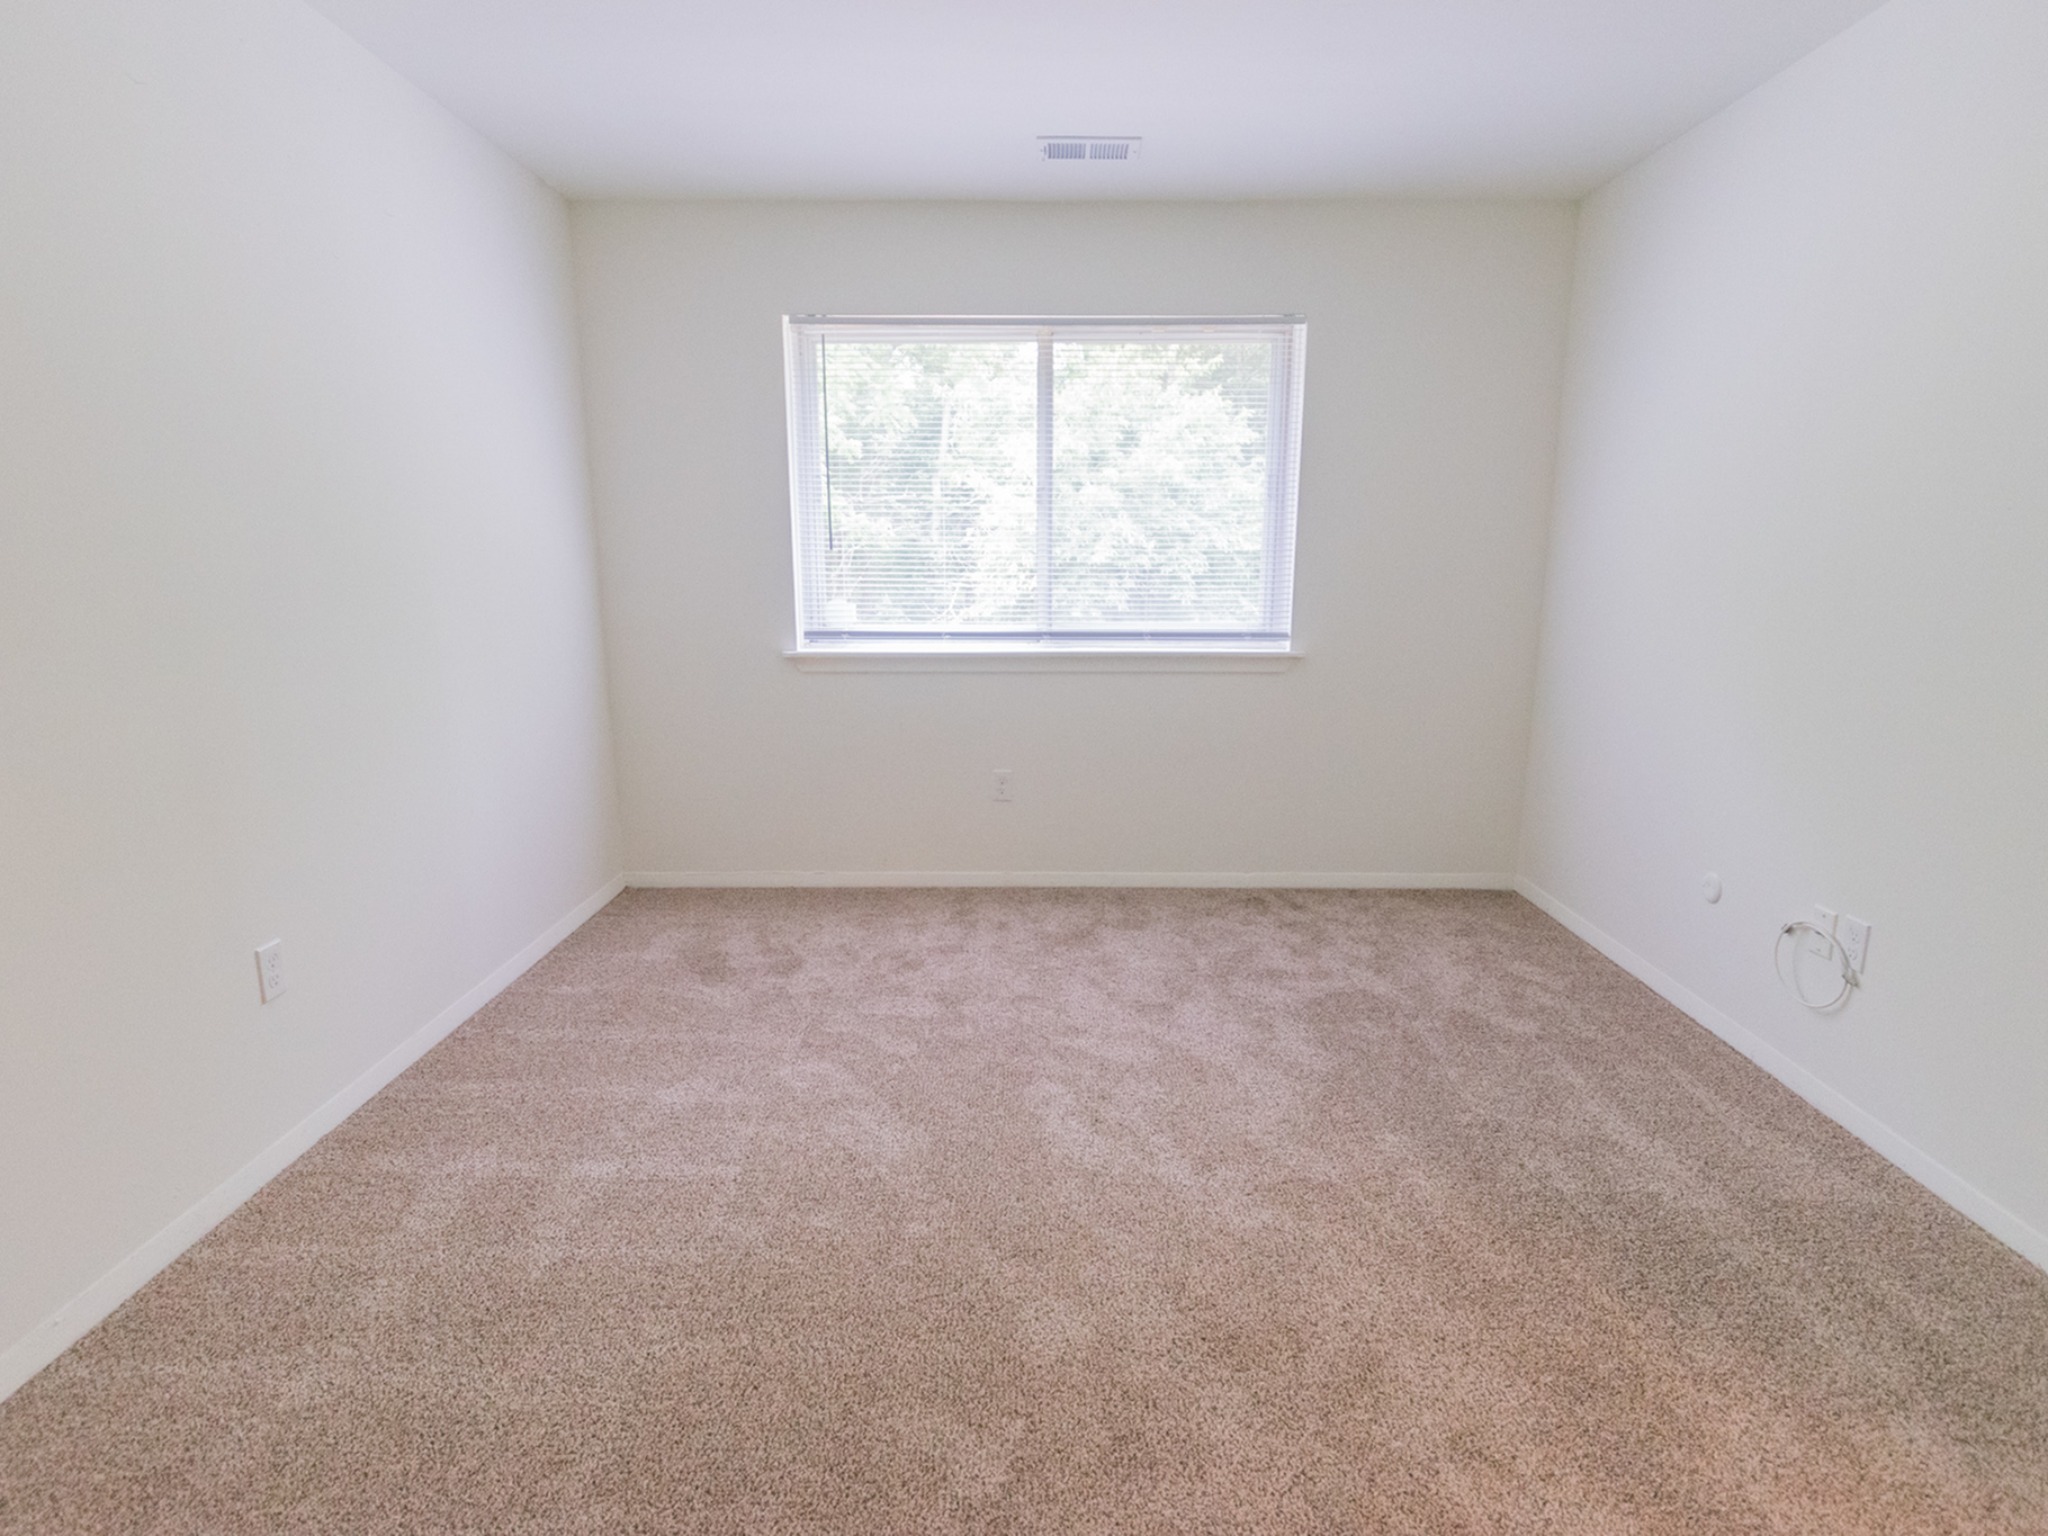 Bedroom with a large window and beige carpets in Indian Run Apartments.